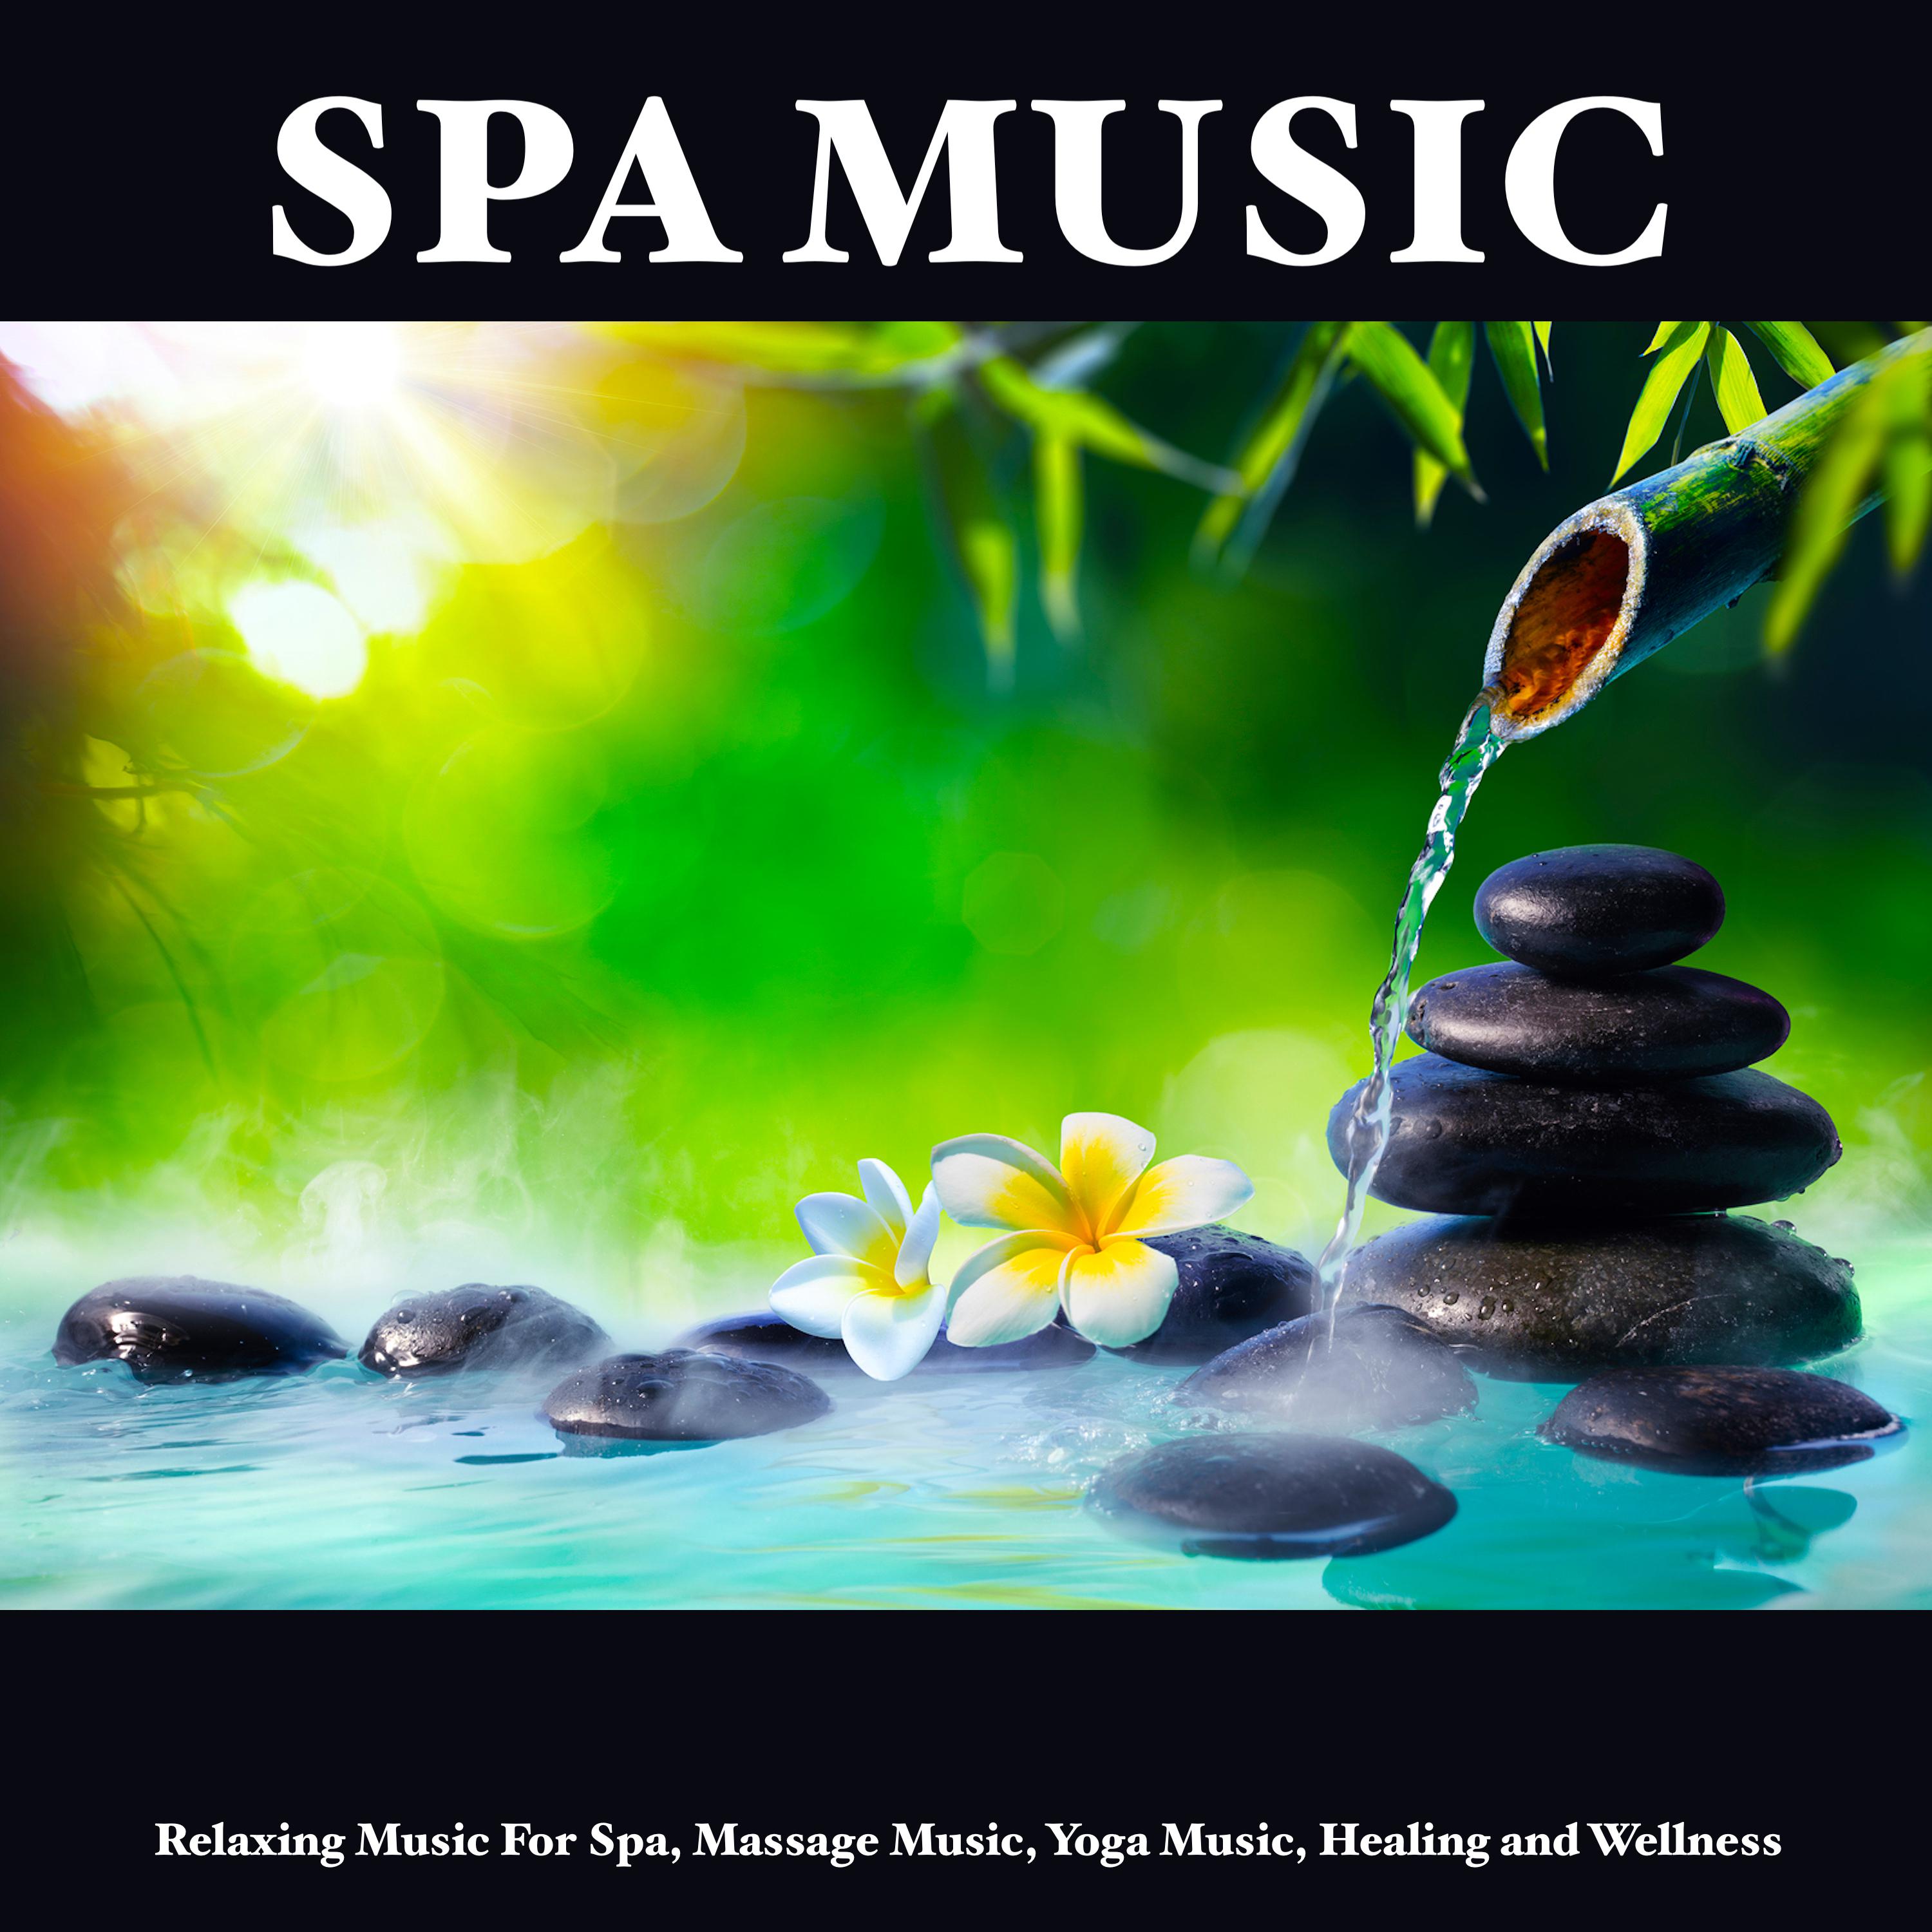 Spa Music: Relaxing Music For Spa, Massage Music, Yoga Music, Healing and Wellness